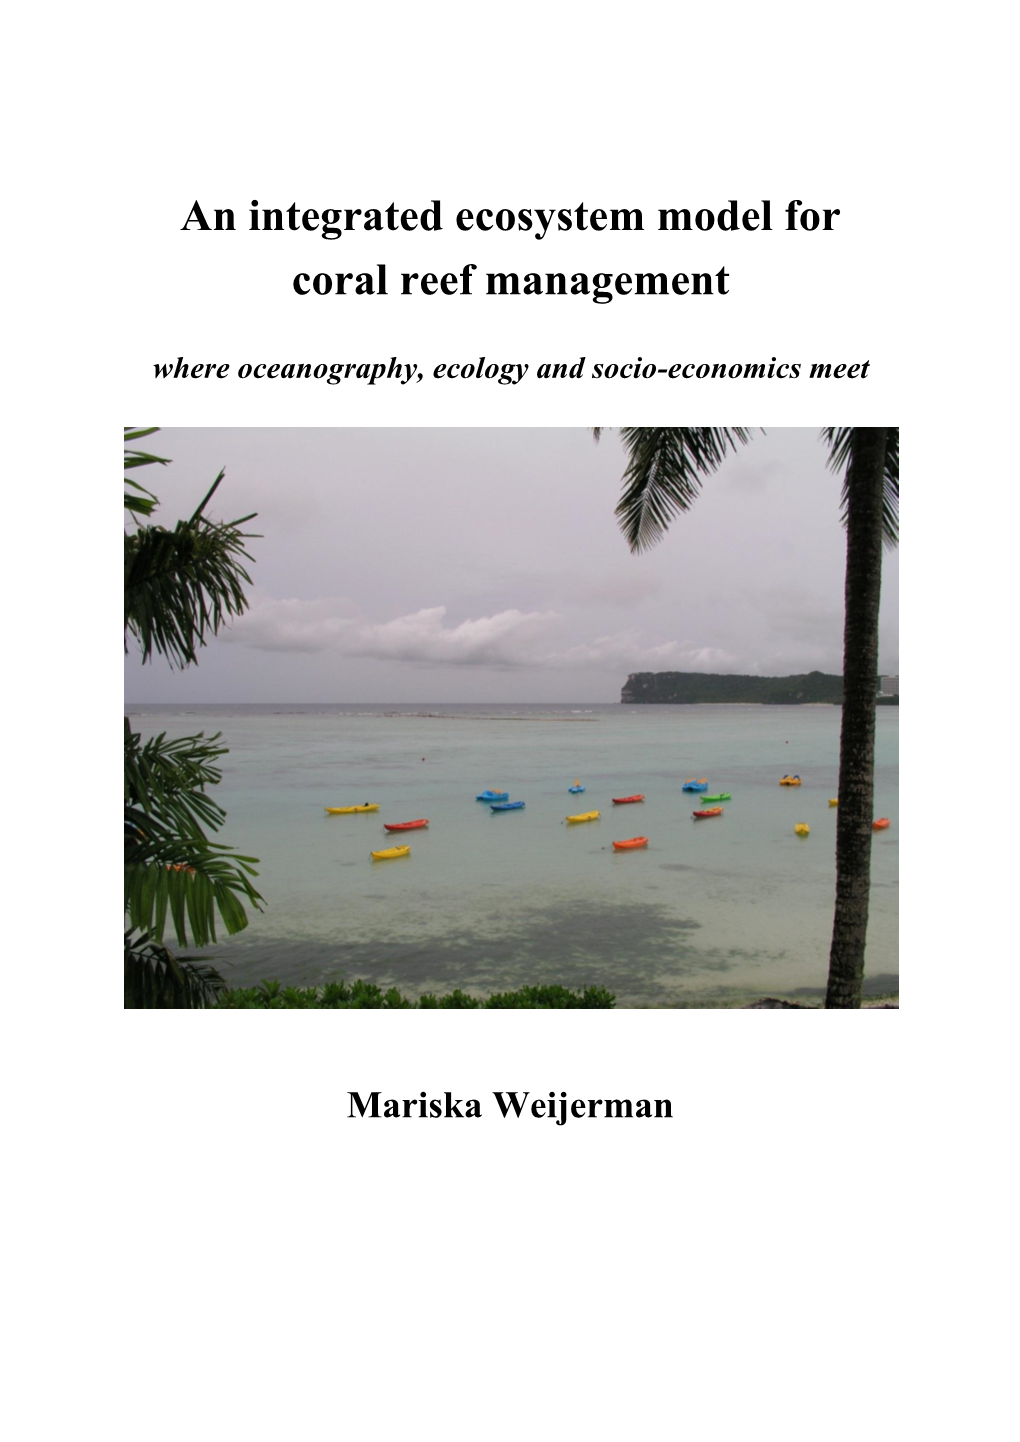 An Integrated Ecosystem Model for Coral Reef Management Where Oceanography, Ecology and Socio-Economics Meet